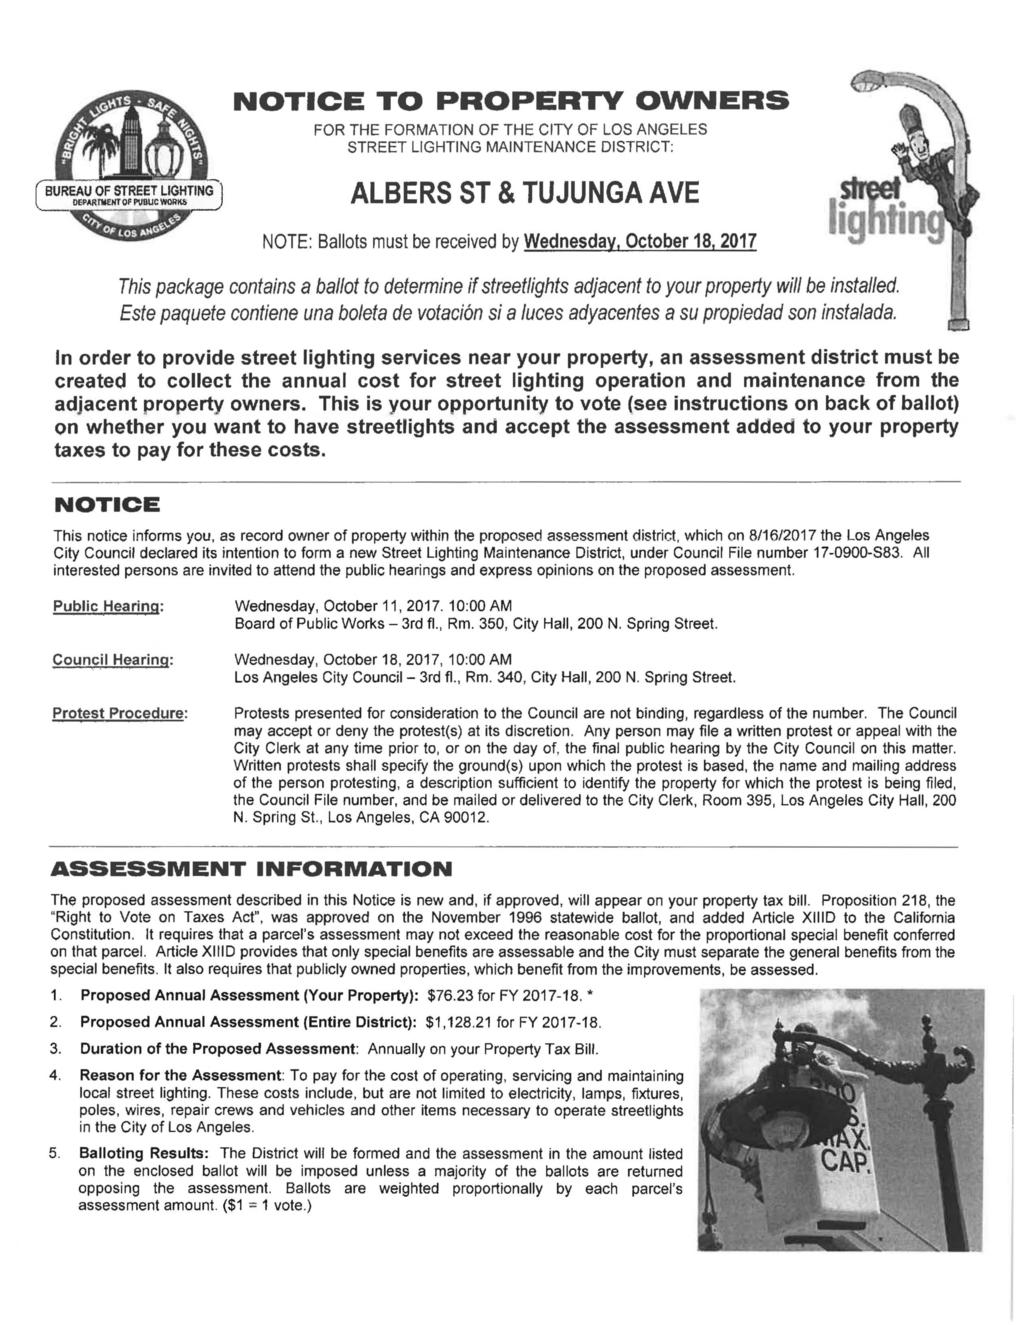 BUREAU OF STREET LIGHTING oemrmtmr op nrauc works NOTICE TO PROPERTY OWNERS FOR THE FORMATION OF THE CITY OF LOS ANGELES STREET LIGHTING MAINTENANCE DISTRICT: ALBERS ST & TUJUNGA AVE NOTE: Ballots